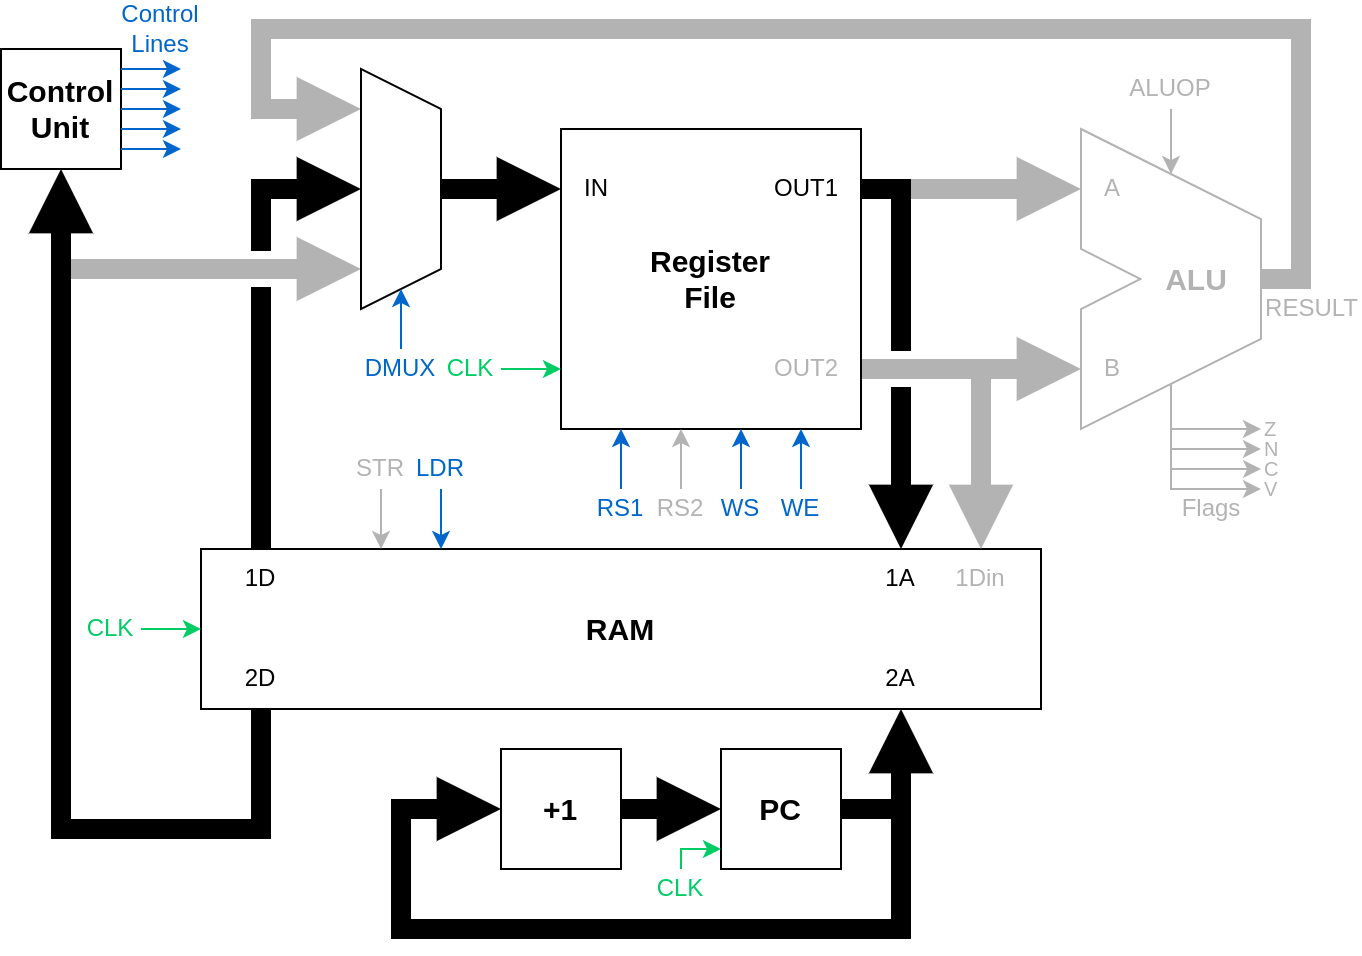 Full CPU with LDR instruction path highlighted